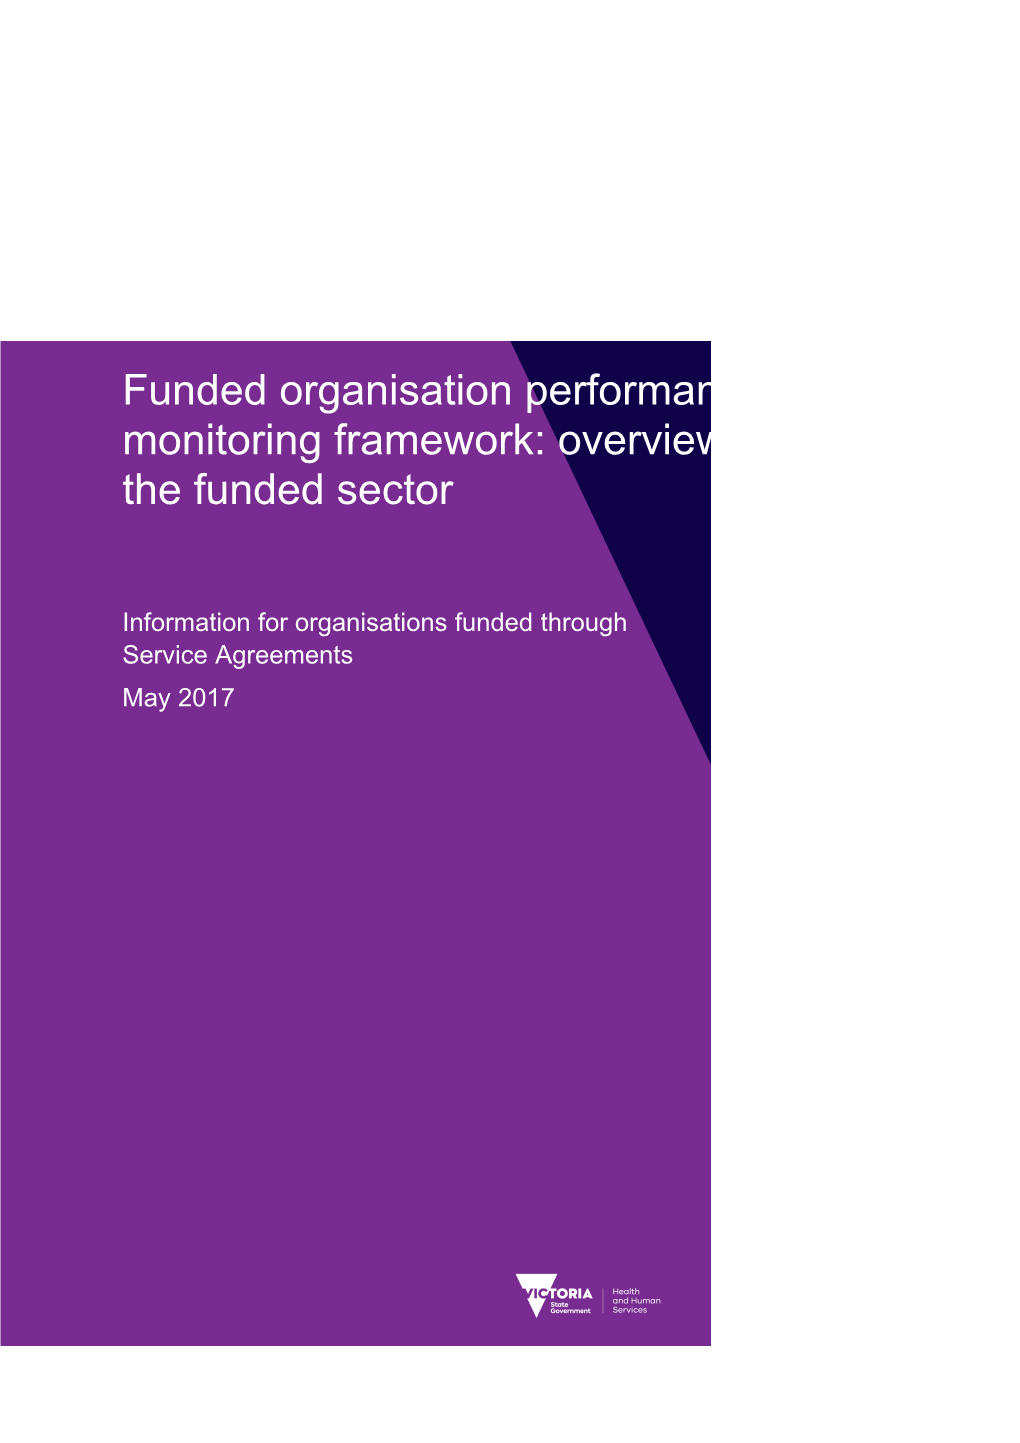 Funded Organisation Performance Monitoring Framework: Overview for the Funded Sector